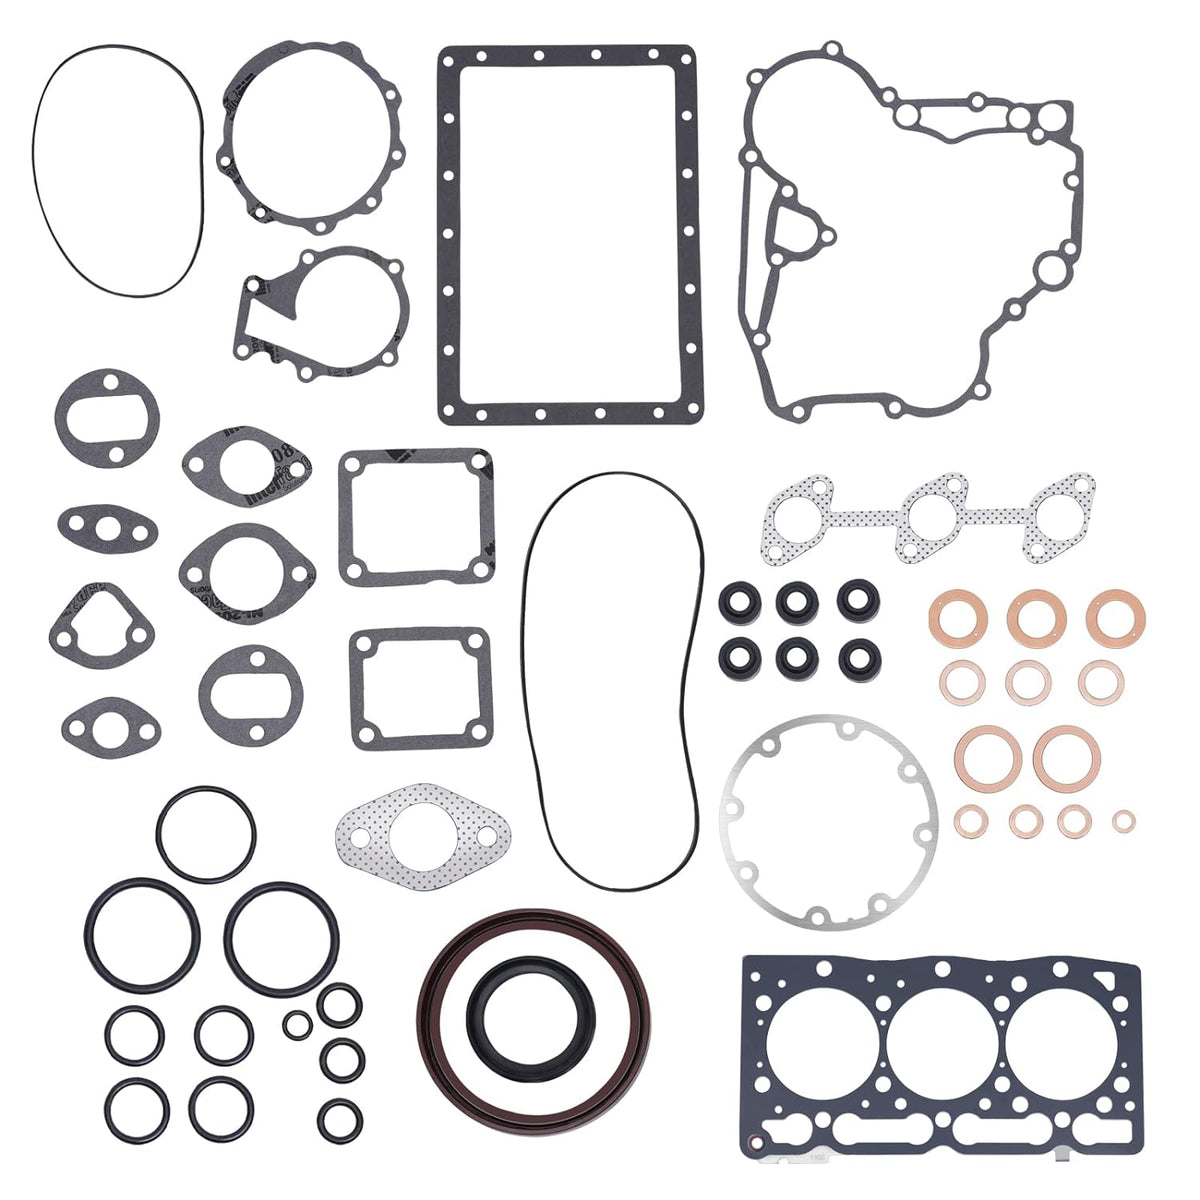 Complete Cylinder Head with Full Gasket Kit for Kubota D1005 Engine - KUDUPARTS